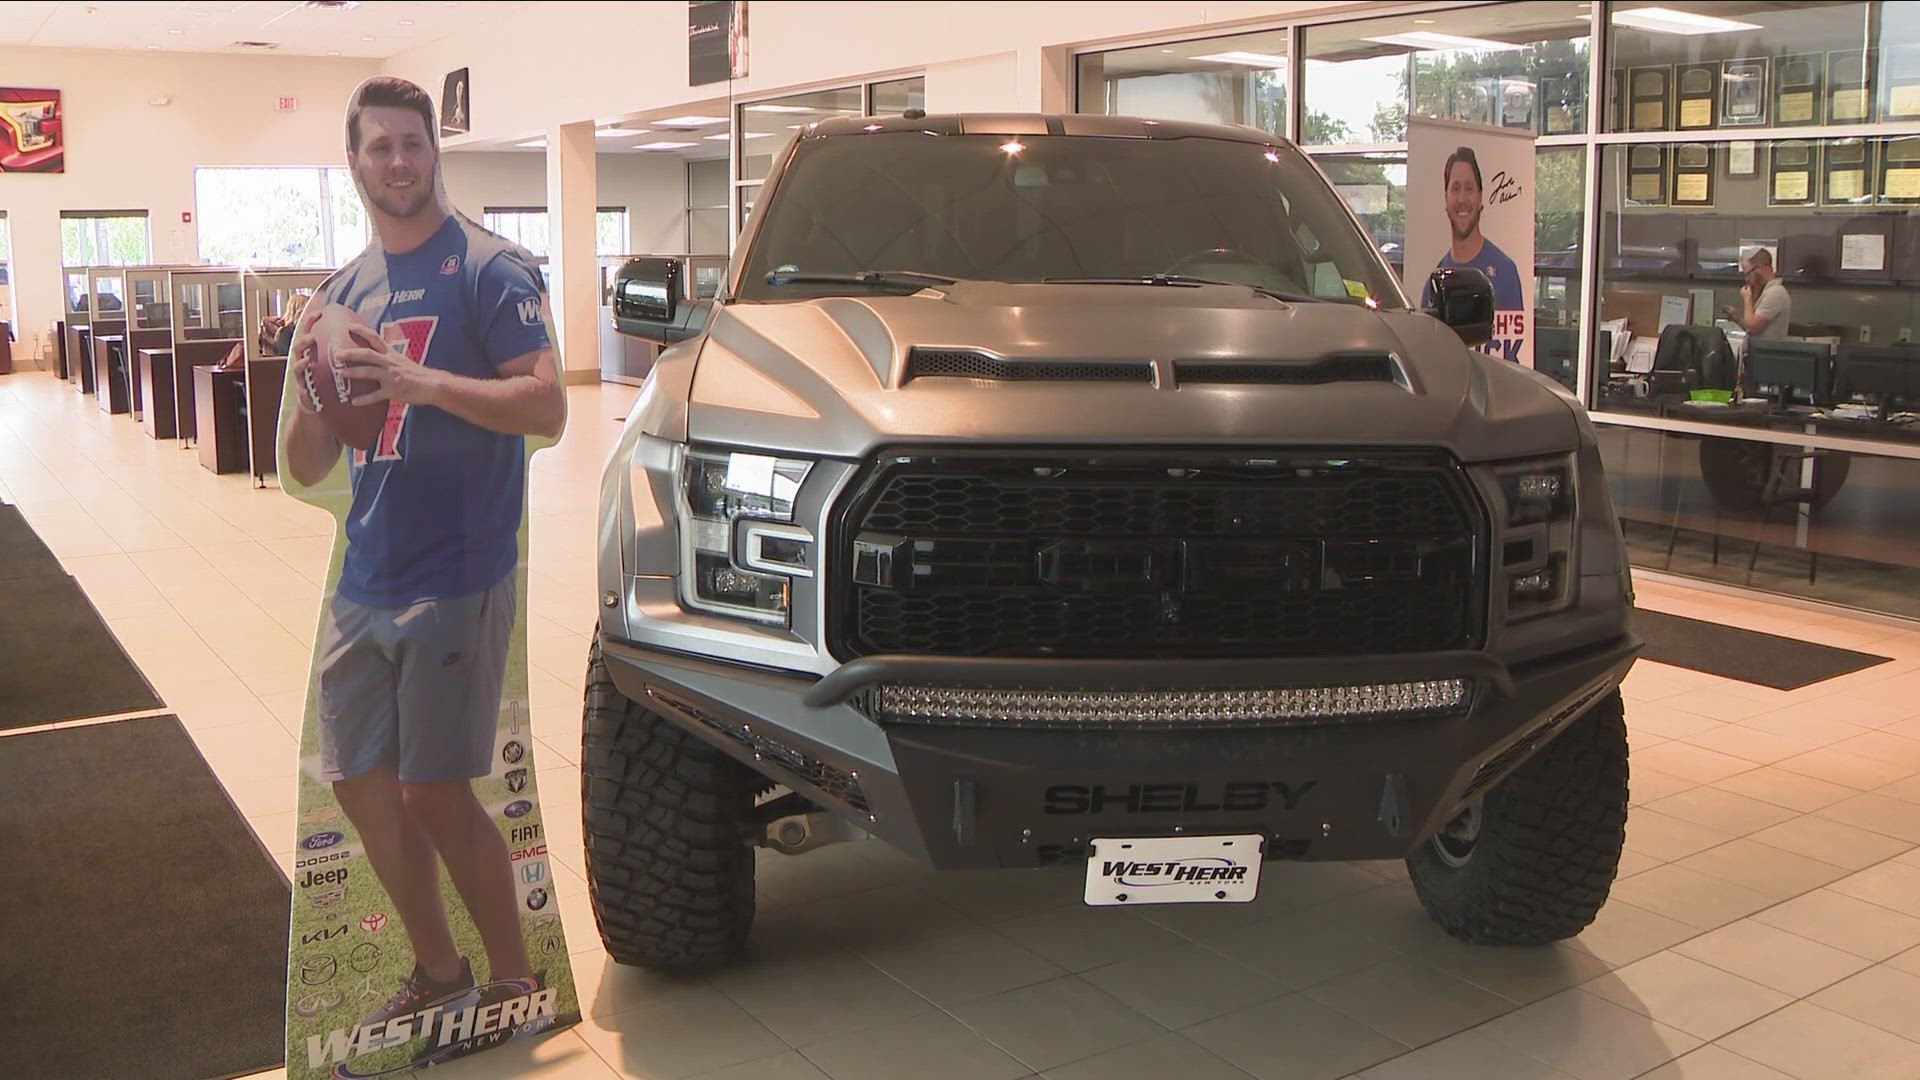 Your chance to win a brand new pickup truck - VA News